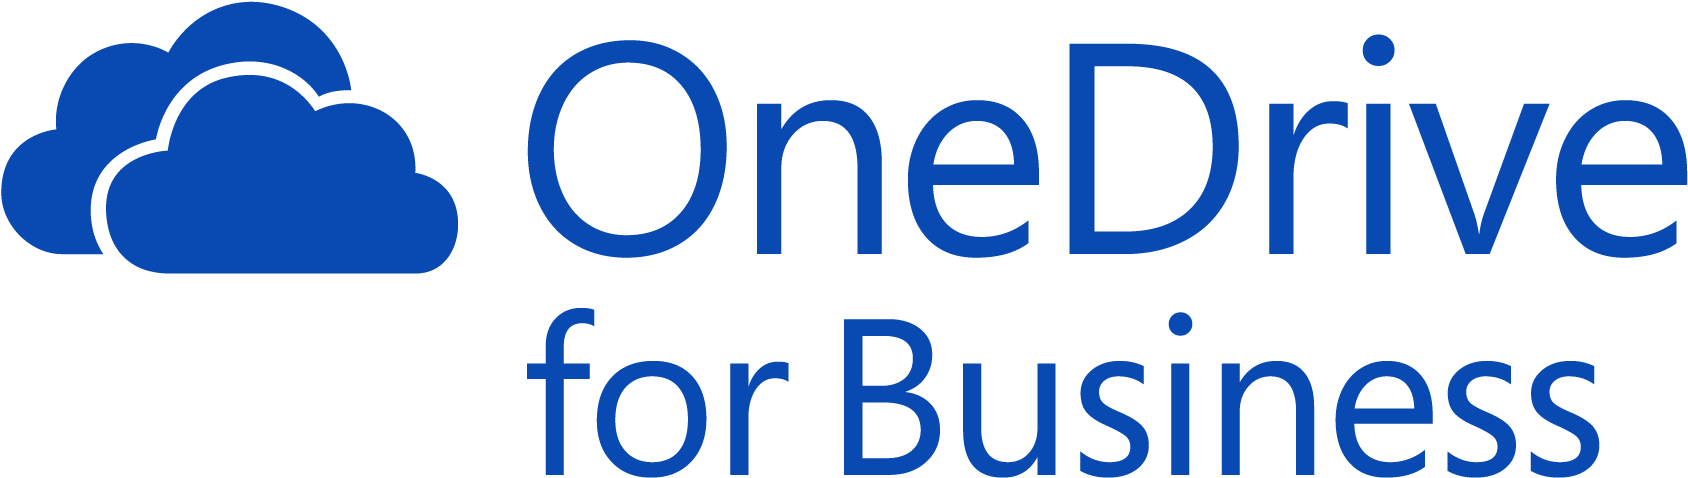 Onedrive For Business Logo - Microsoft Onedrive For Business (1983x775)